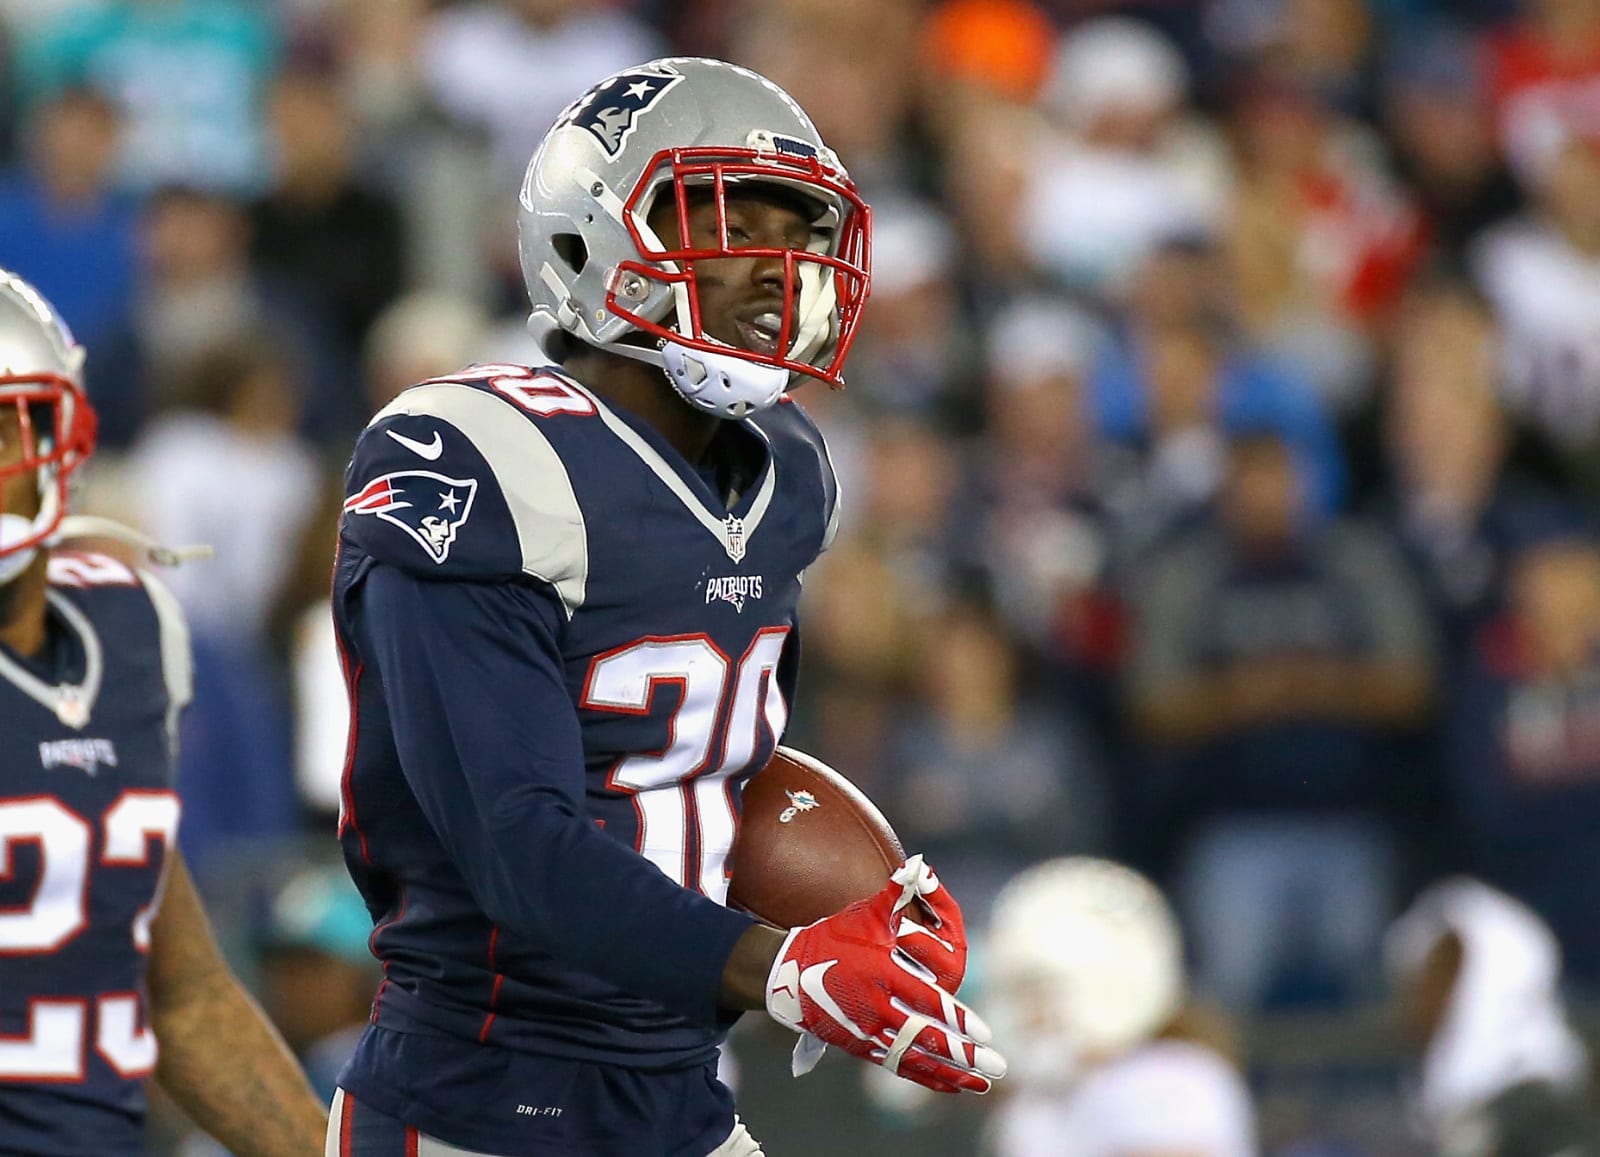 Patriots: Who will lead the team in interceptions this season? - Page 6